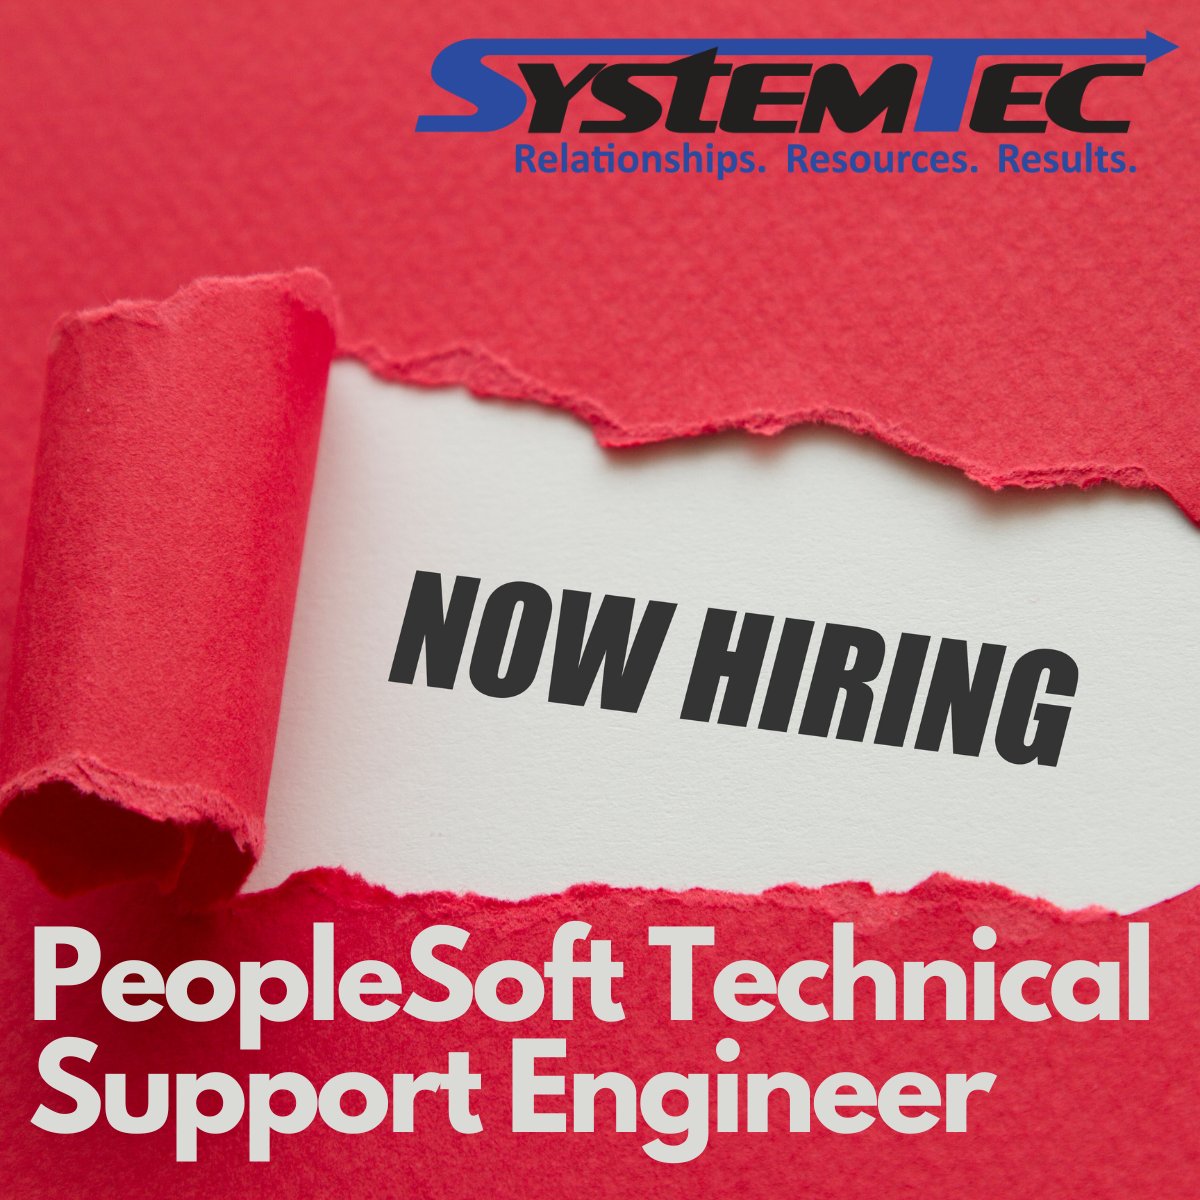 We're hiring a PeopleSoft Technical Support Engineer for a mostly remote role (candidates may need to occasionally come on-site to Clemson, SC for meetings) Learn much more and apply today: systemtec.net/.../peoplesoft…
#peoplesoft #hcmtechnology #hiringnow #scjobs #stillhiring